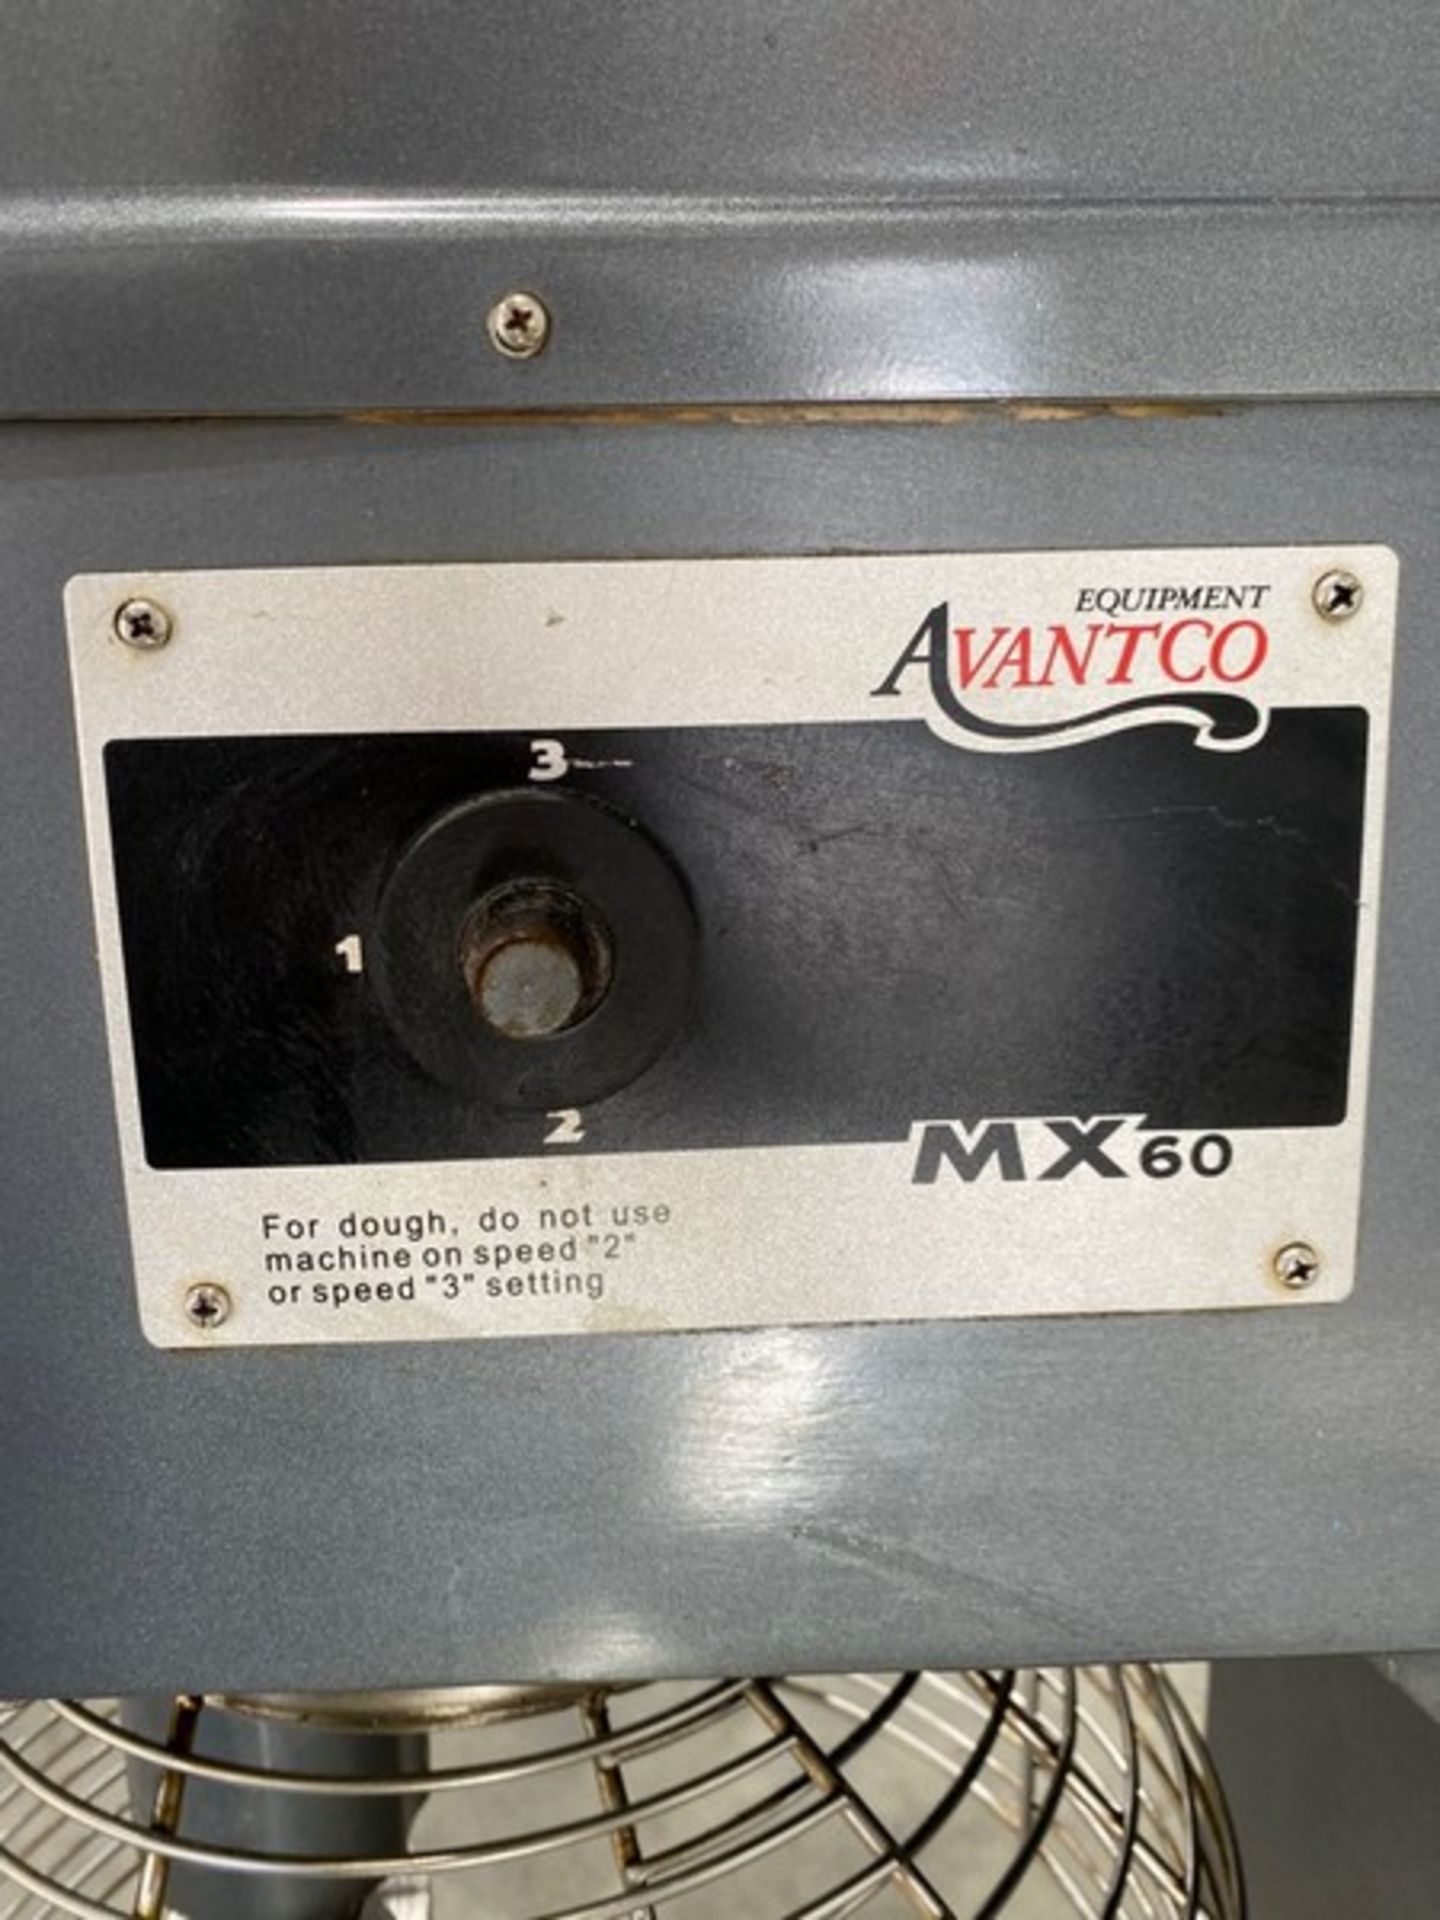 Avantco MX60 Mixer. Serial: 03 0021 16, 60Qt capacity. 240 Volts, 3 Phase, 60 Hz. Bowl is stainless - Image 5 of 5